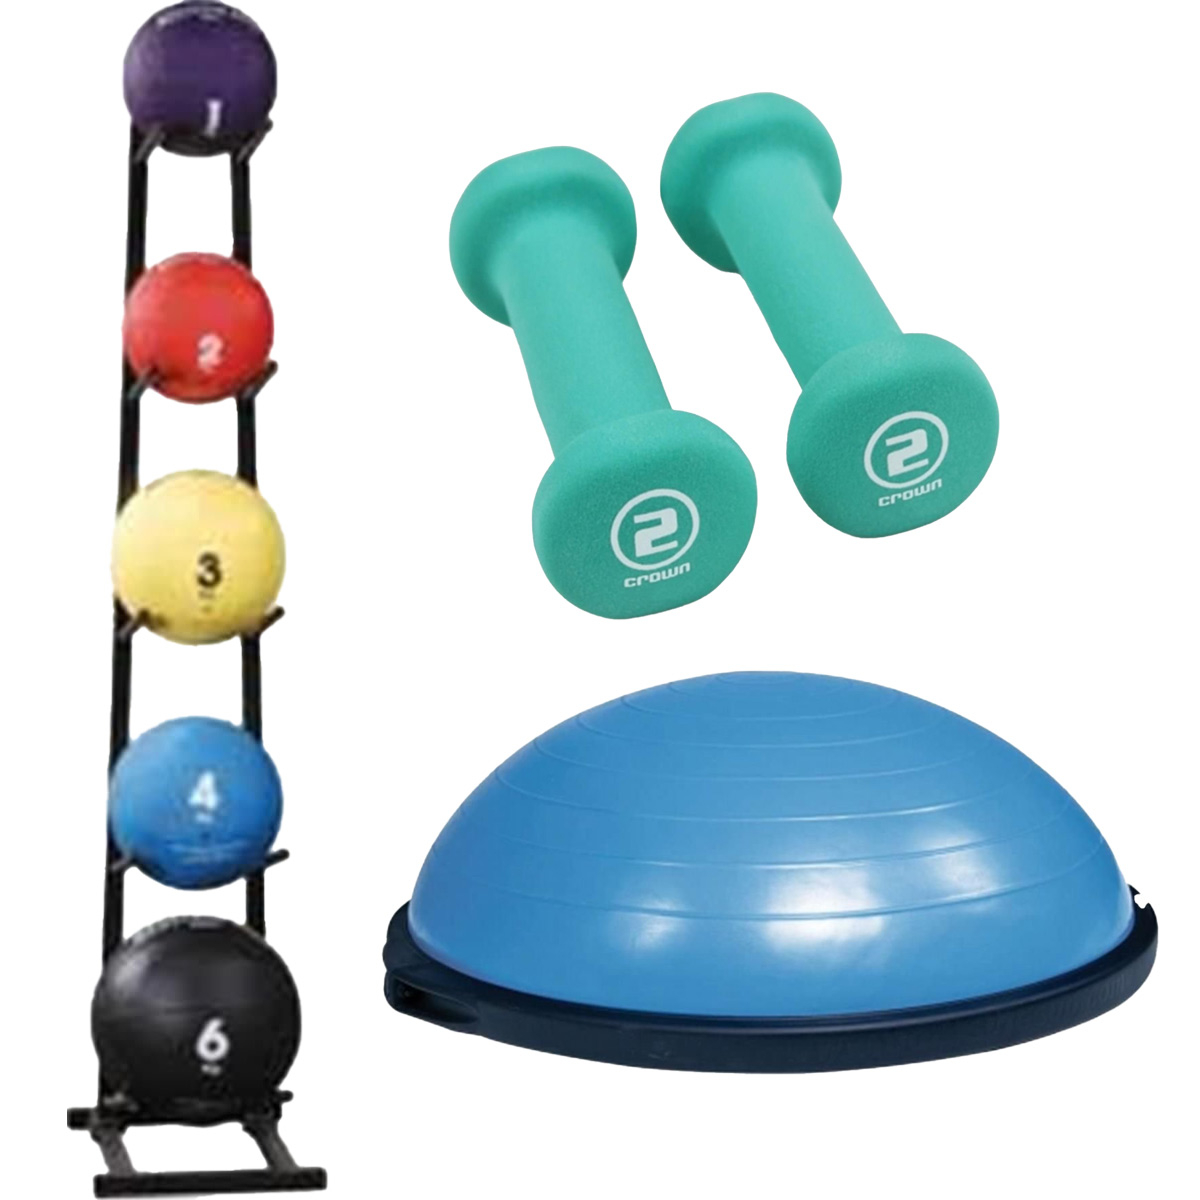 15 Home Gym Essentials for the Outdoor Workout